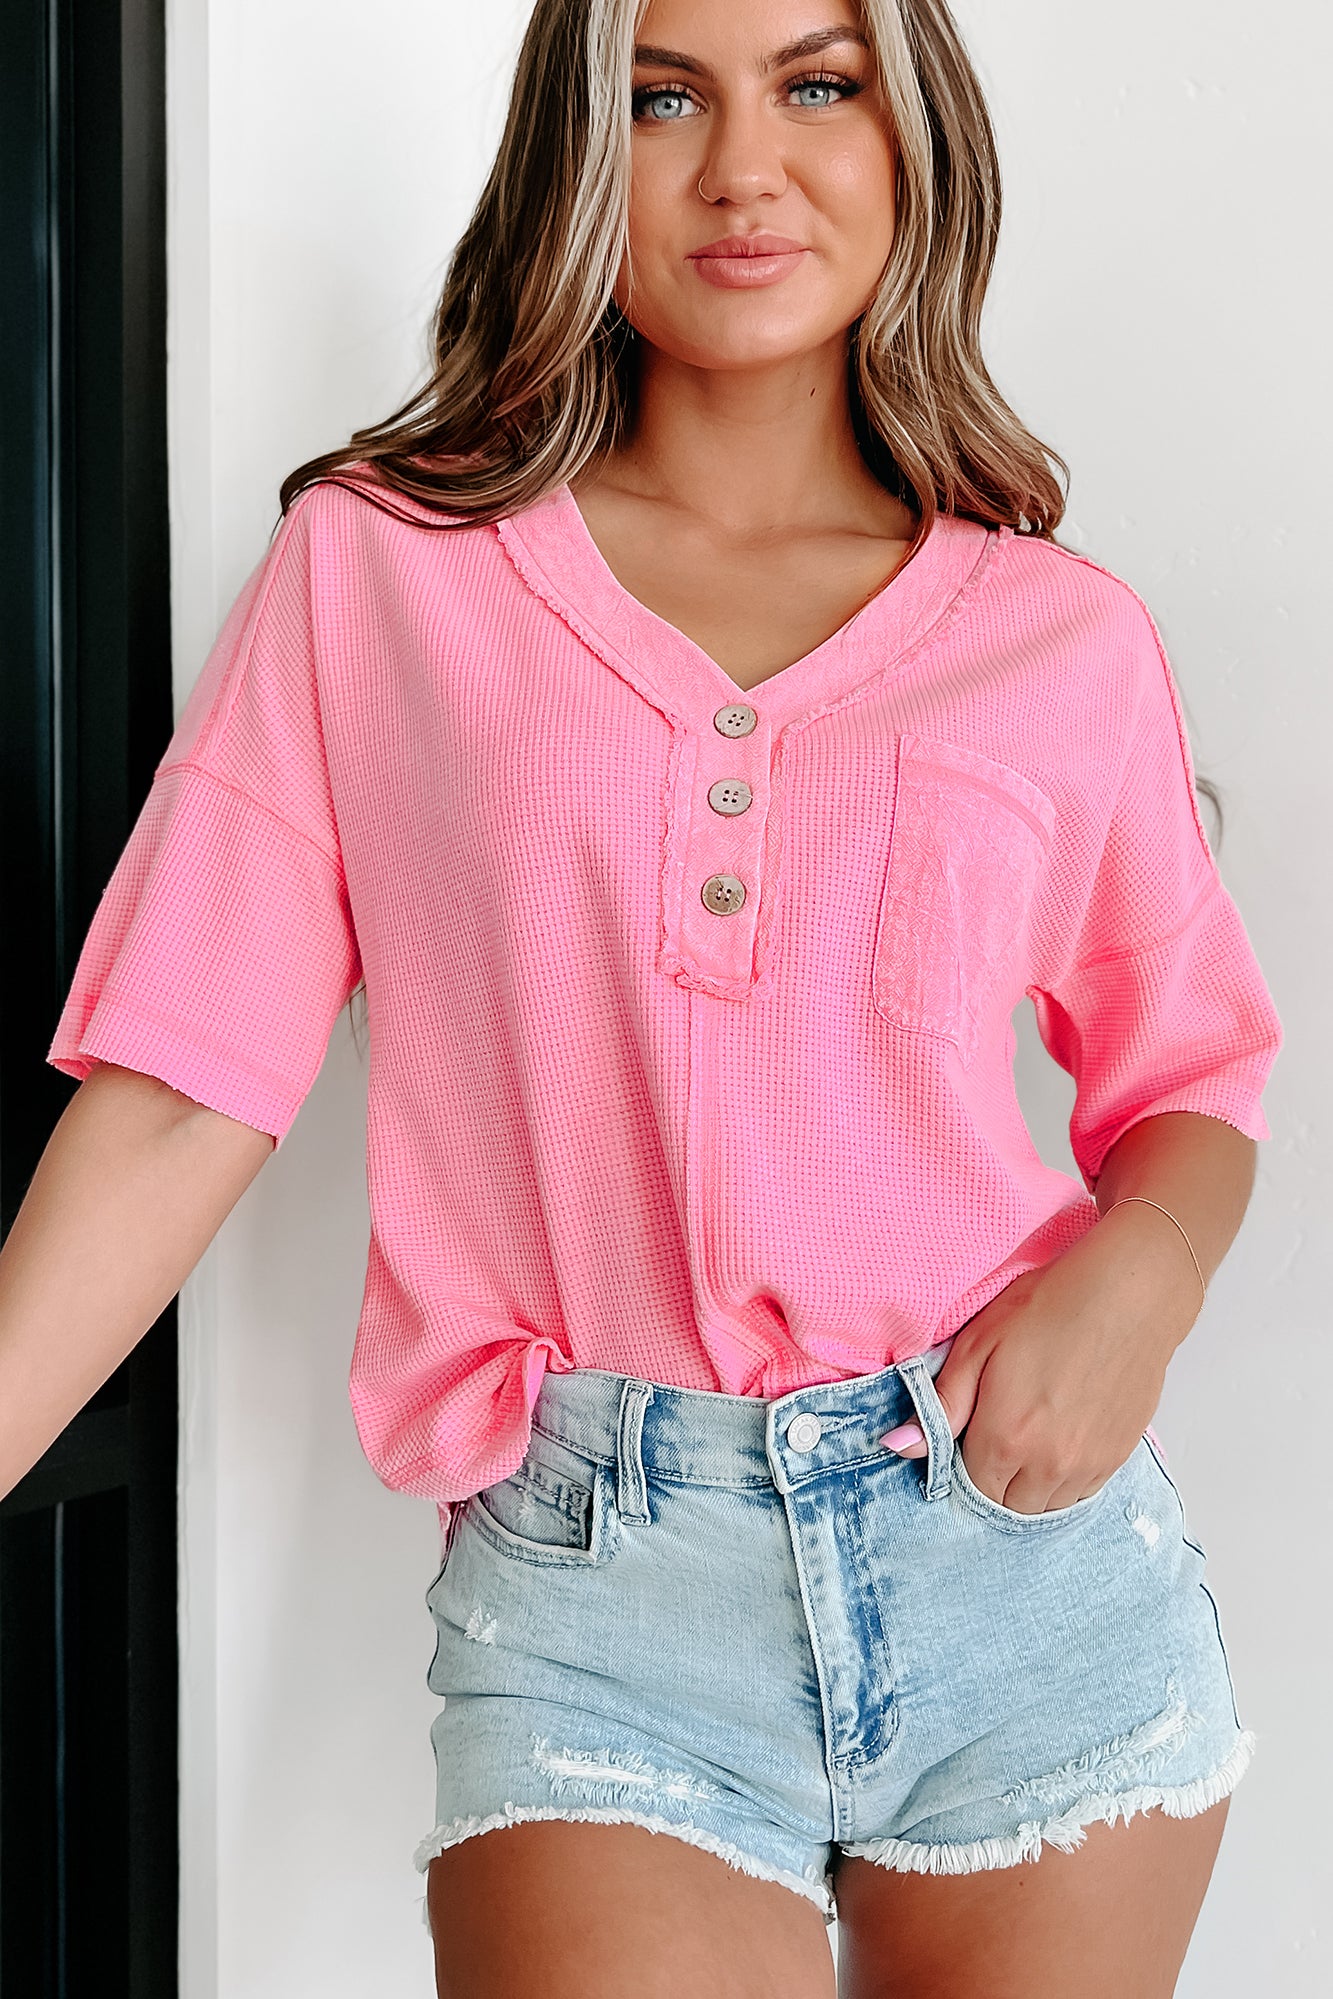 I've Got Places To Be Short Sleeve Thermal Knit Top (Pink) - NanaMacs